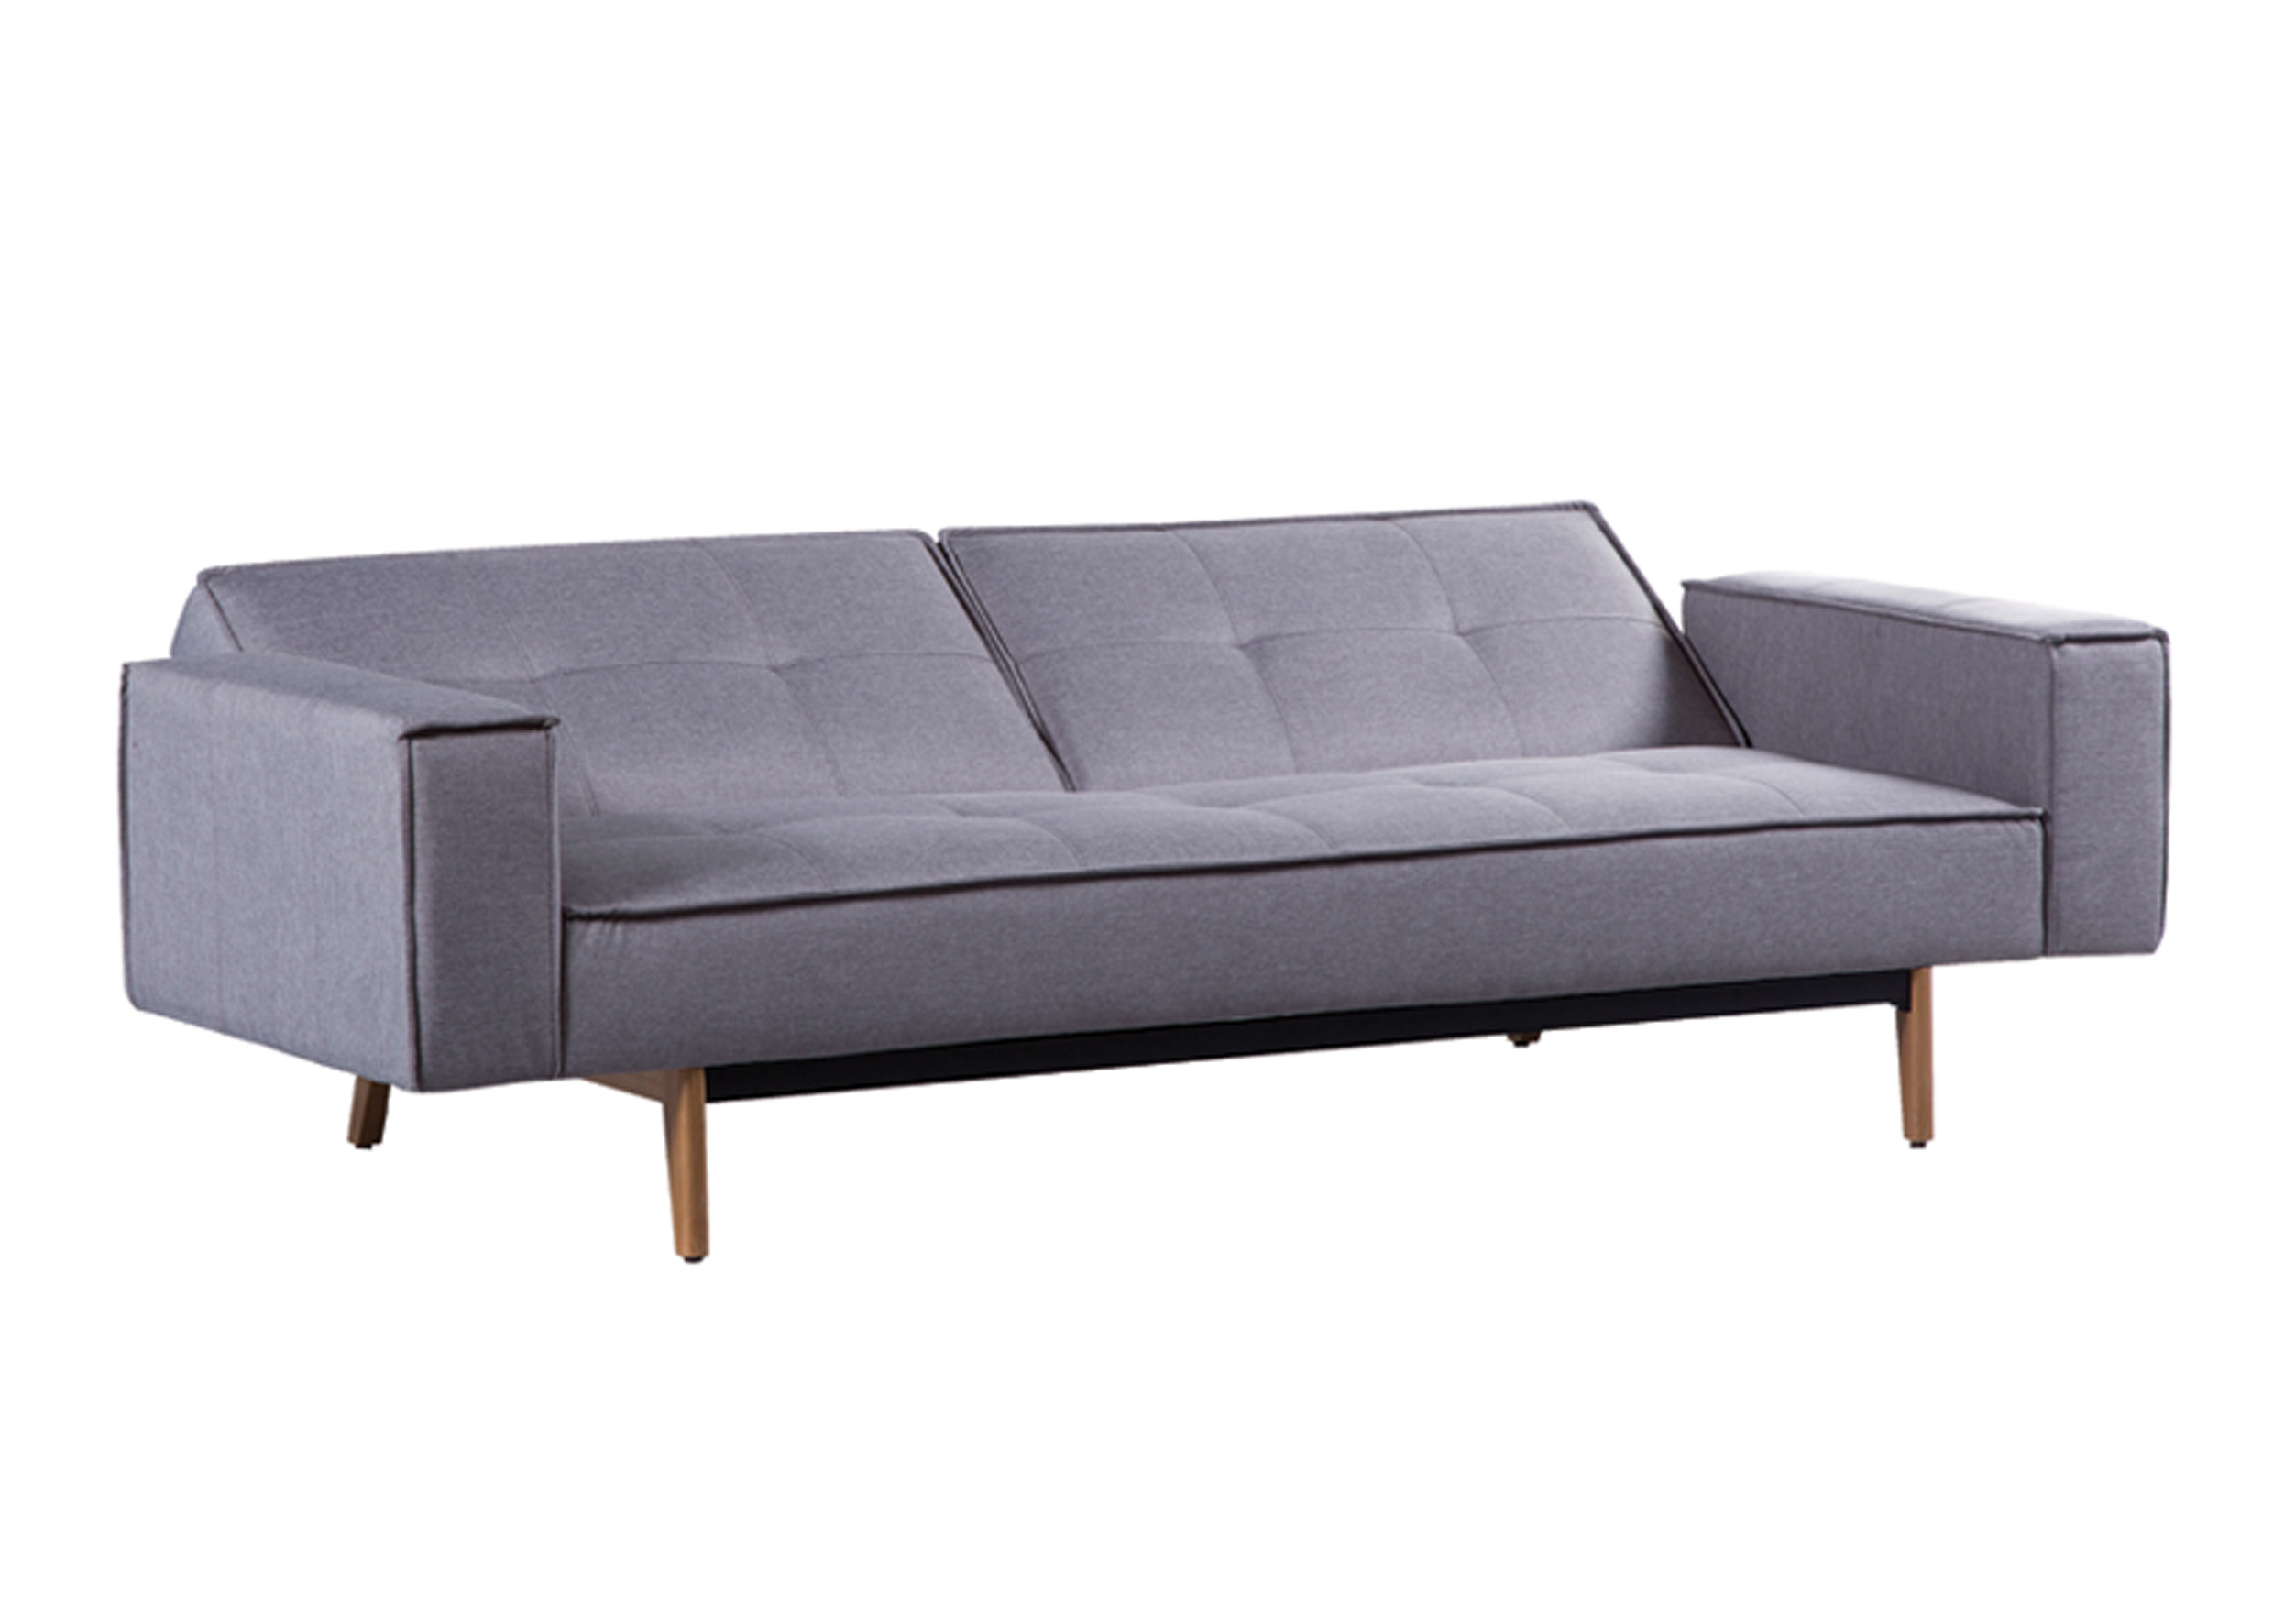 themia-vn-sofa-bed-model-sb14-cach-su-dung-sofabed